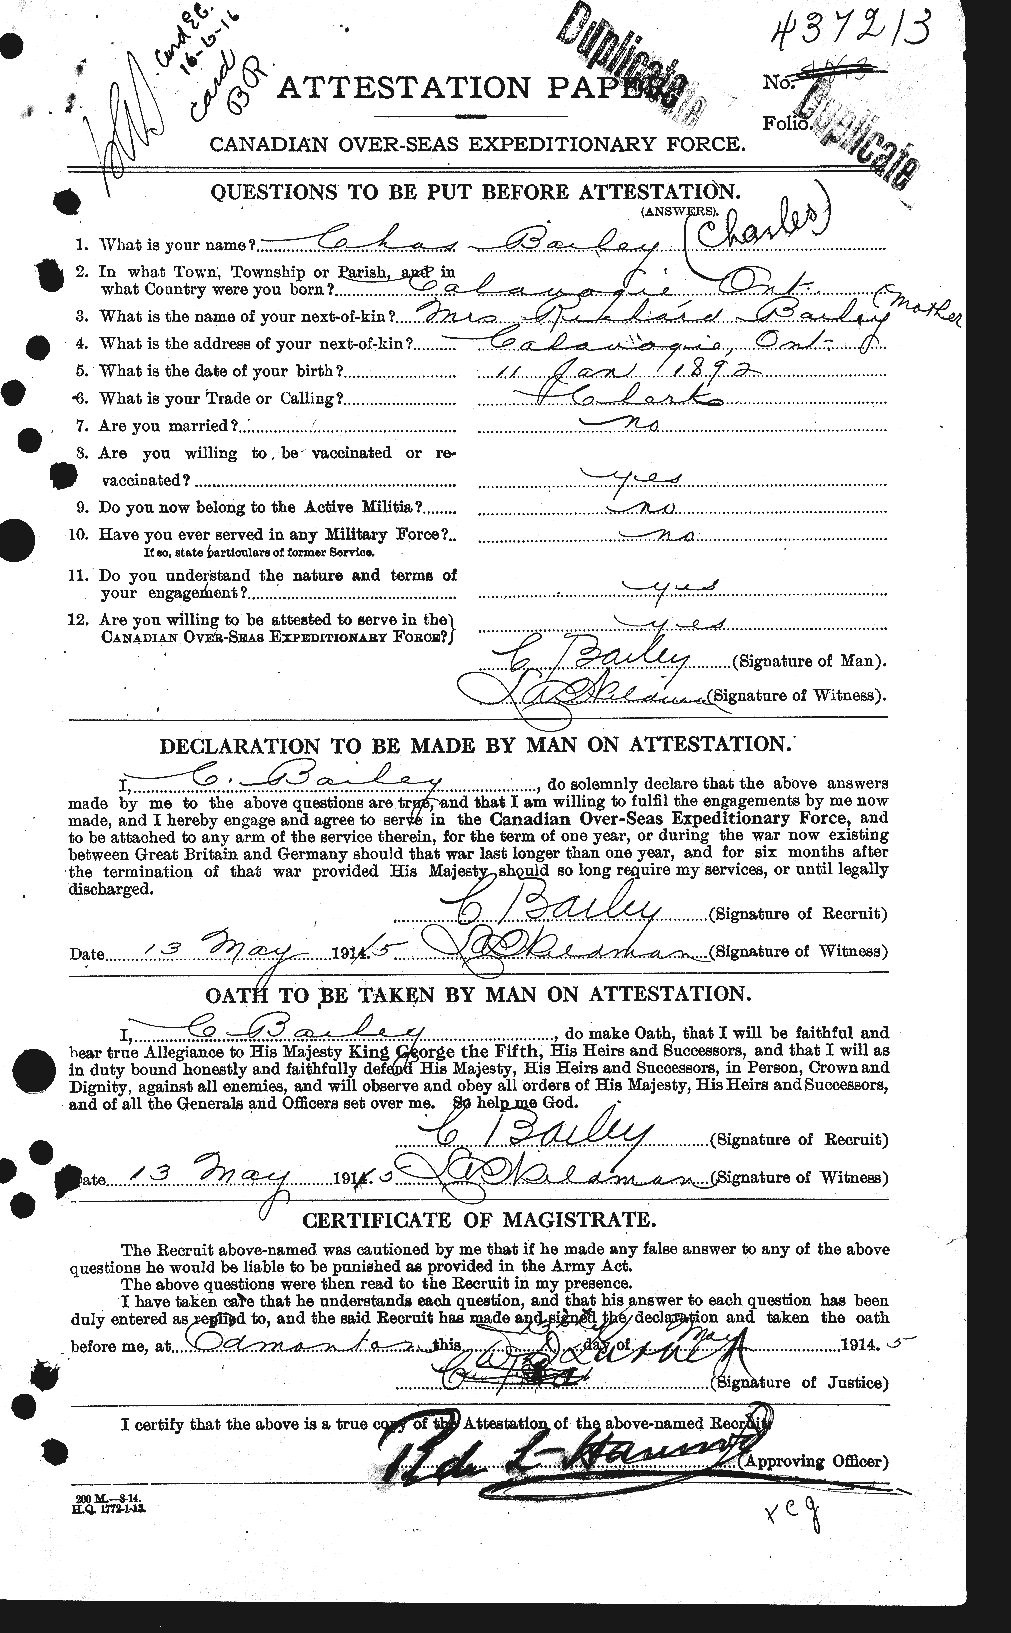 Personnel Records of the First World War - CEF 218377a